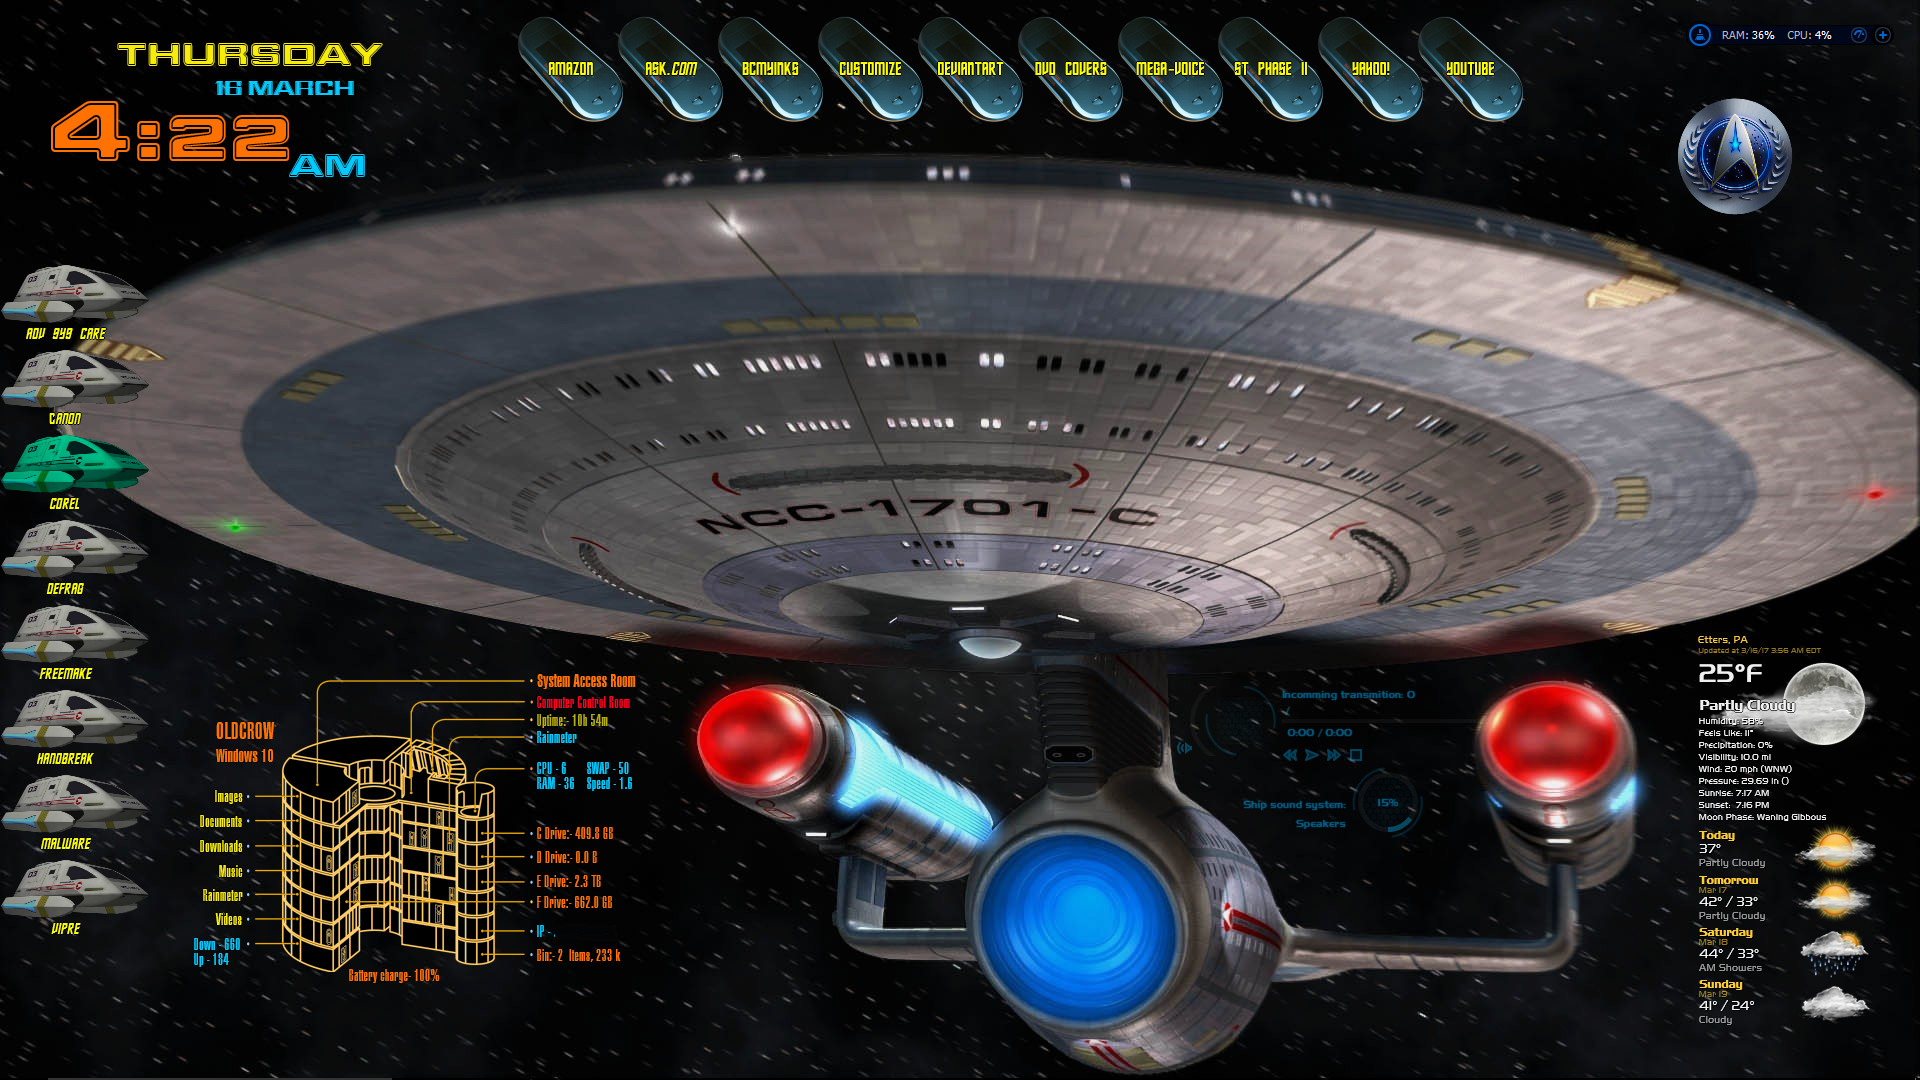 1920x1080 Star Trek Themes 3.0 by oldcrow10 Star Trek Themes 3.0 by oldcrow10